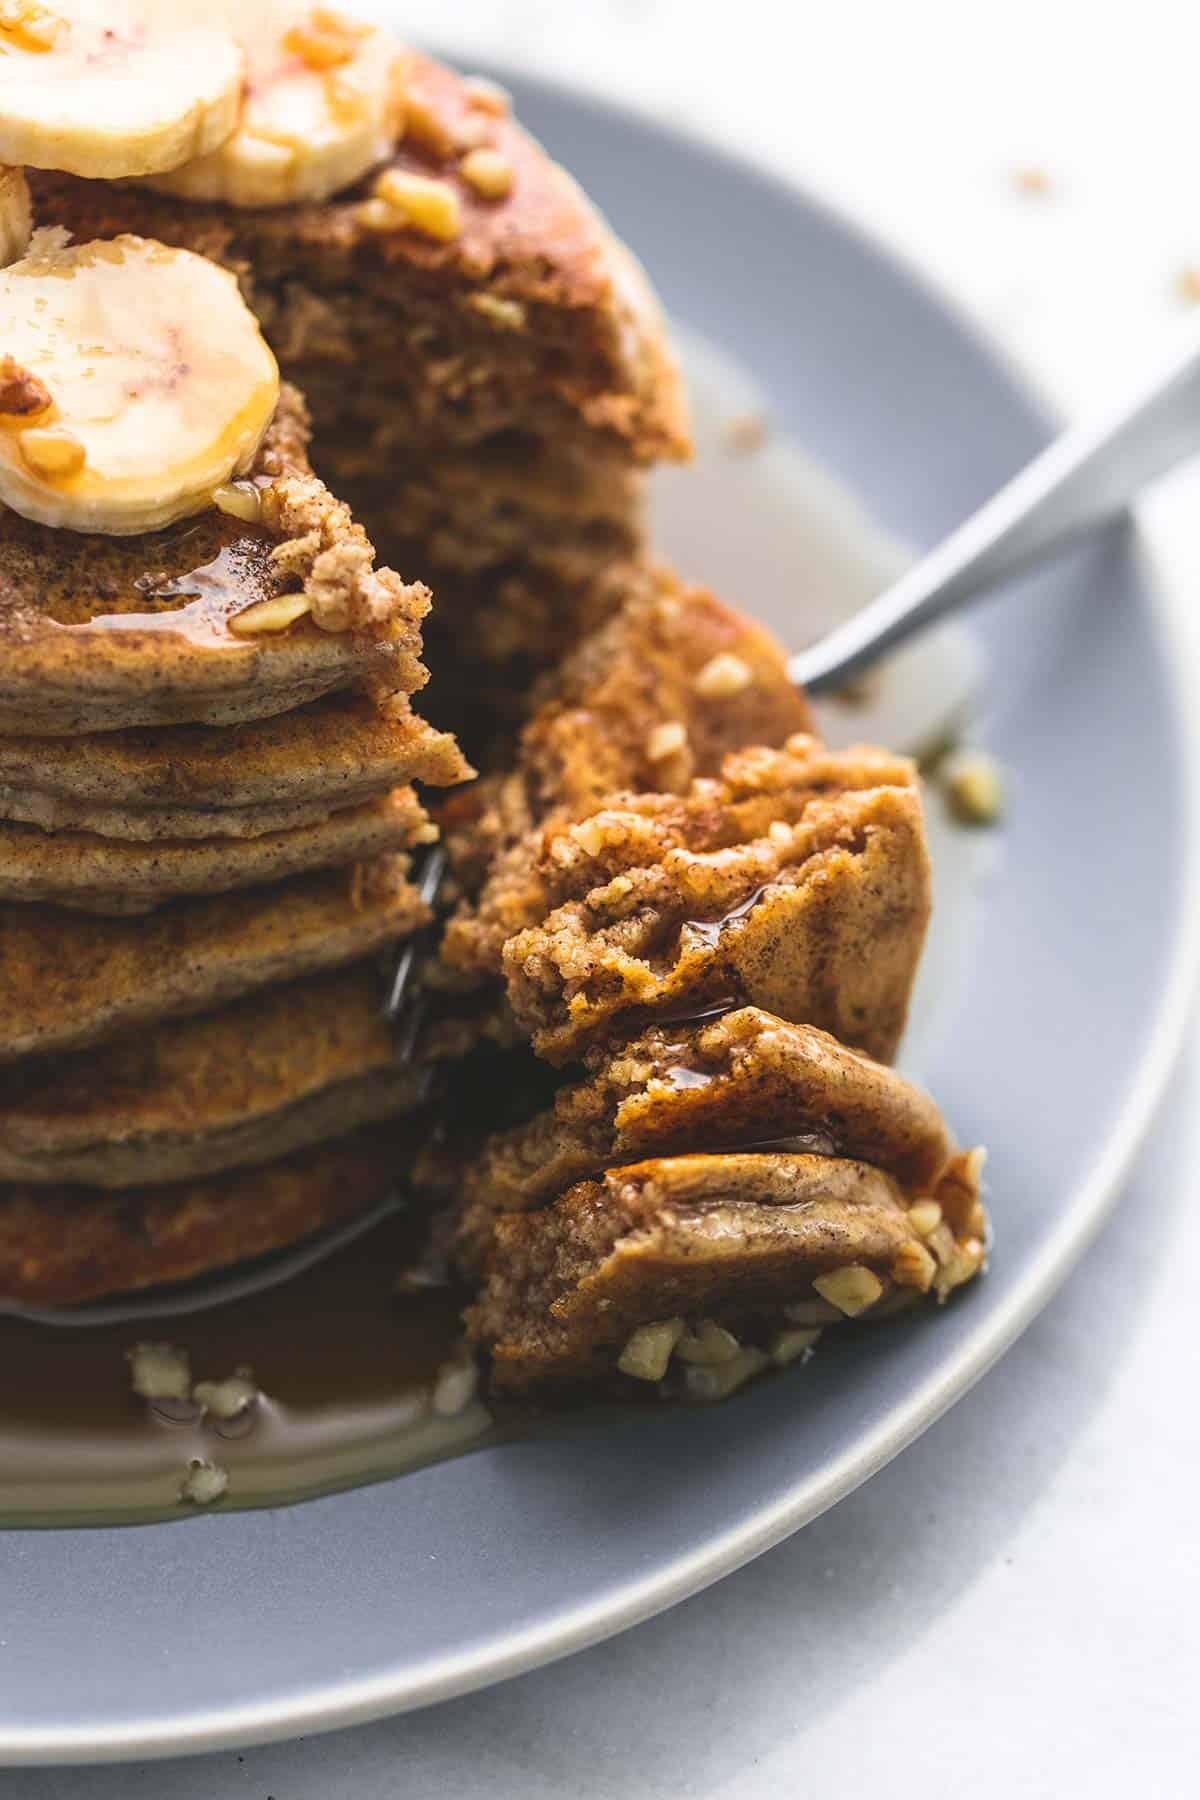 close up of a stack of oatmeal pancakes topped with bananas, chopped nuts, and syrup with a fork in between a bite and the rest of the pancakes on a plate.